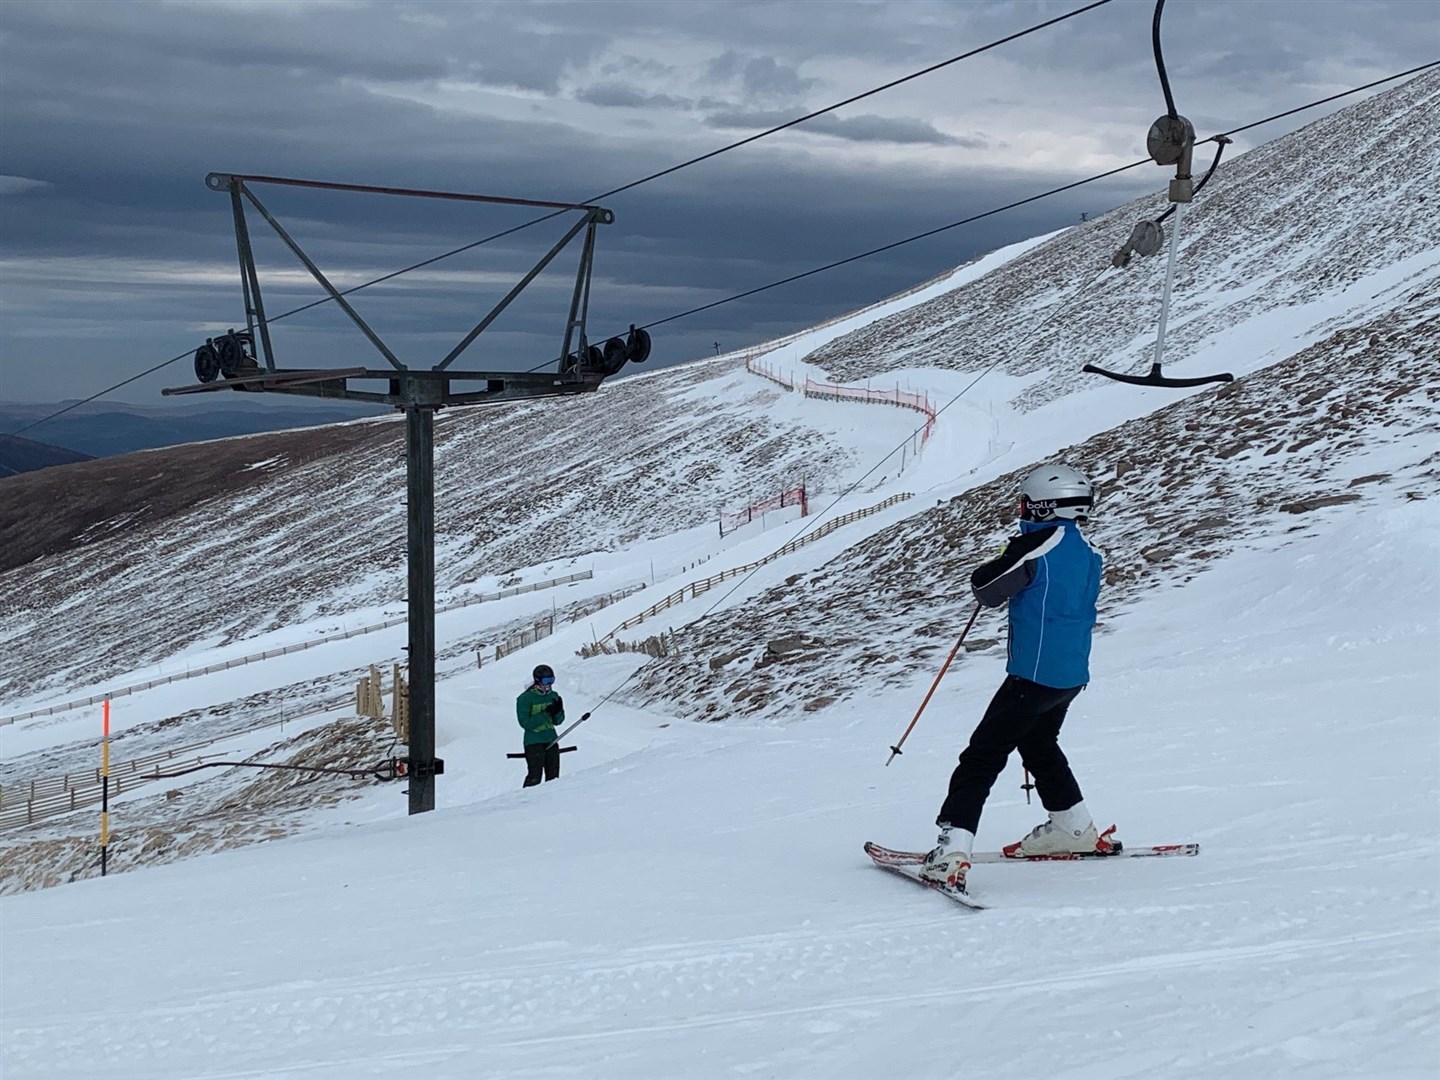 Cairngorm Mountain ski resort's slopes pictured on their last day before the premature closure because of Covid-19.